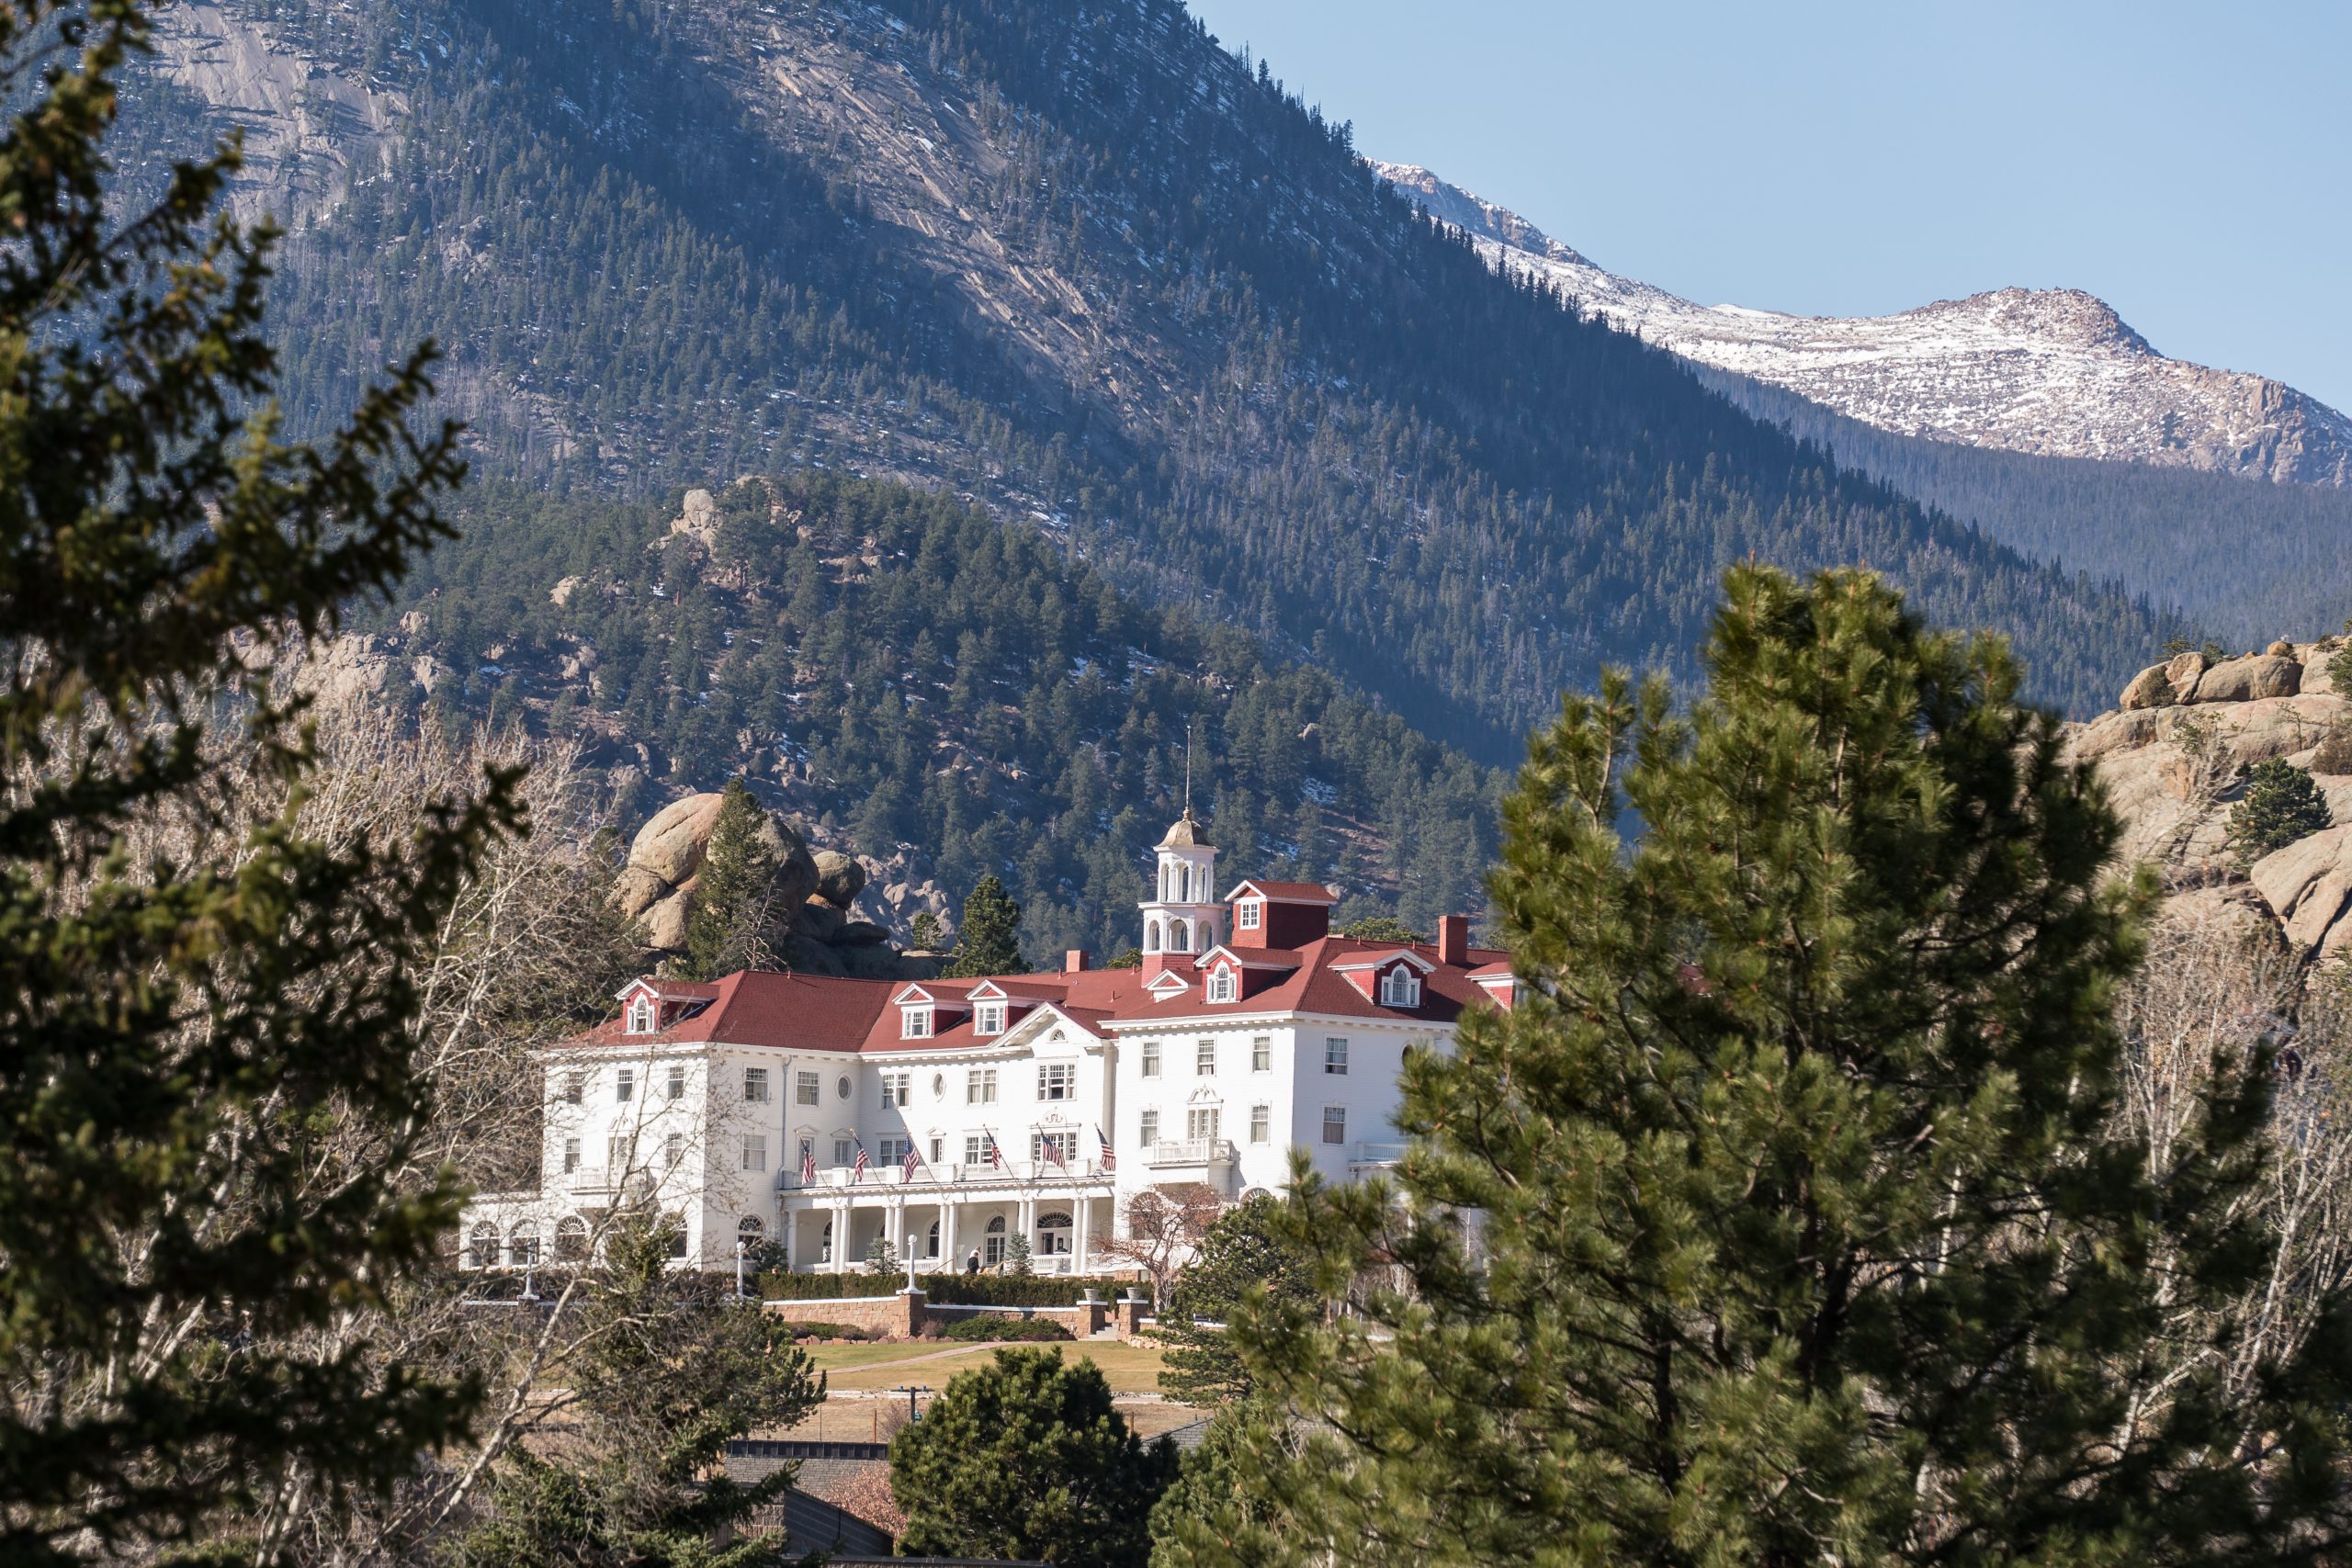 Estes Park, CO - October 31, 2020: View of the historic Staley Hotel in the Rocky Mountains of Estes Park